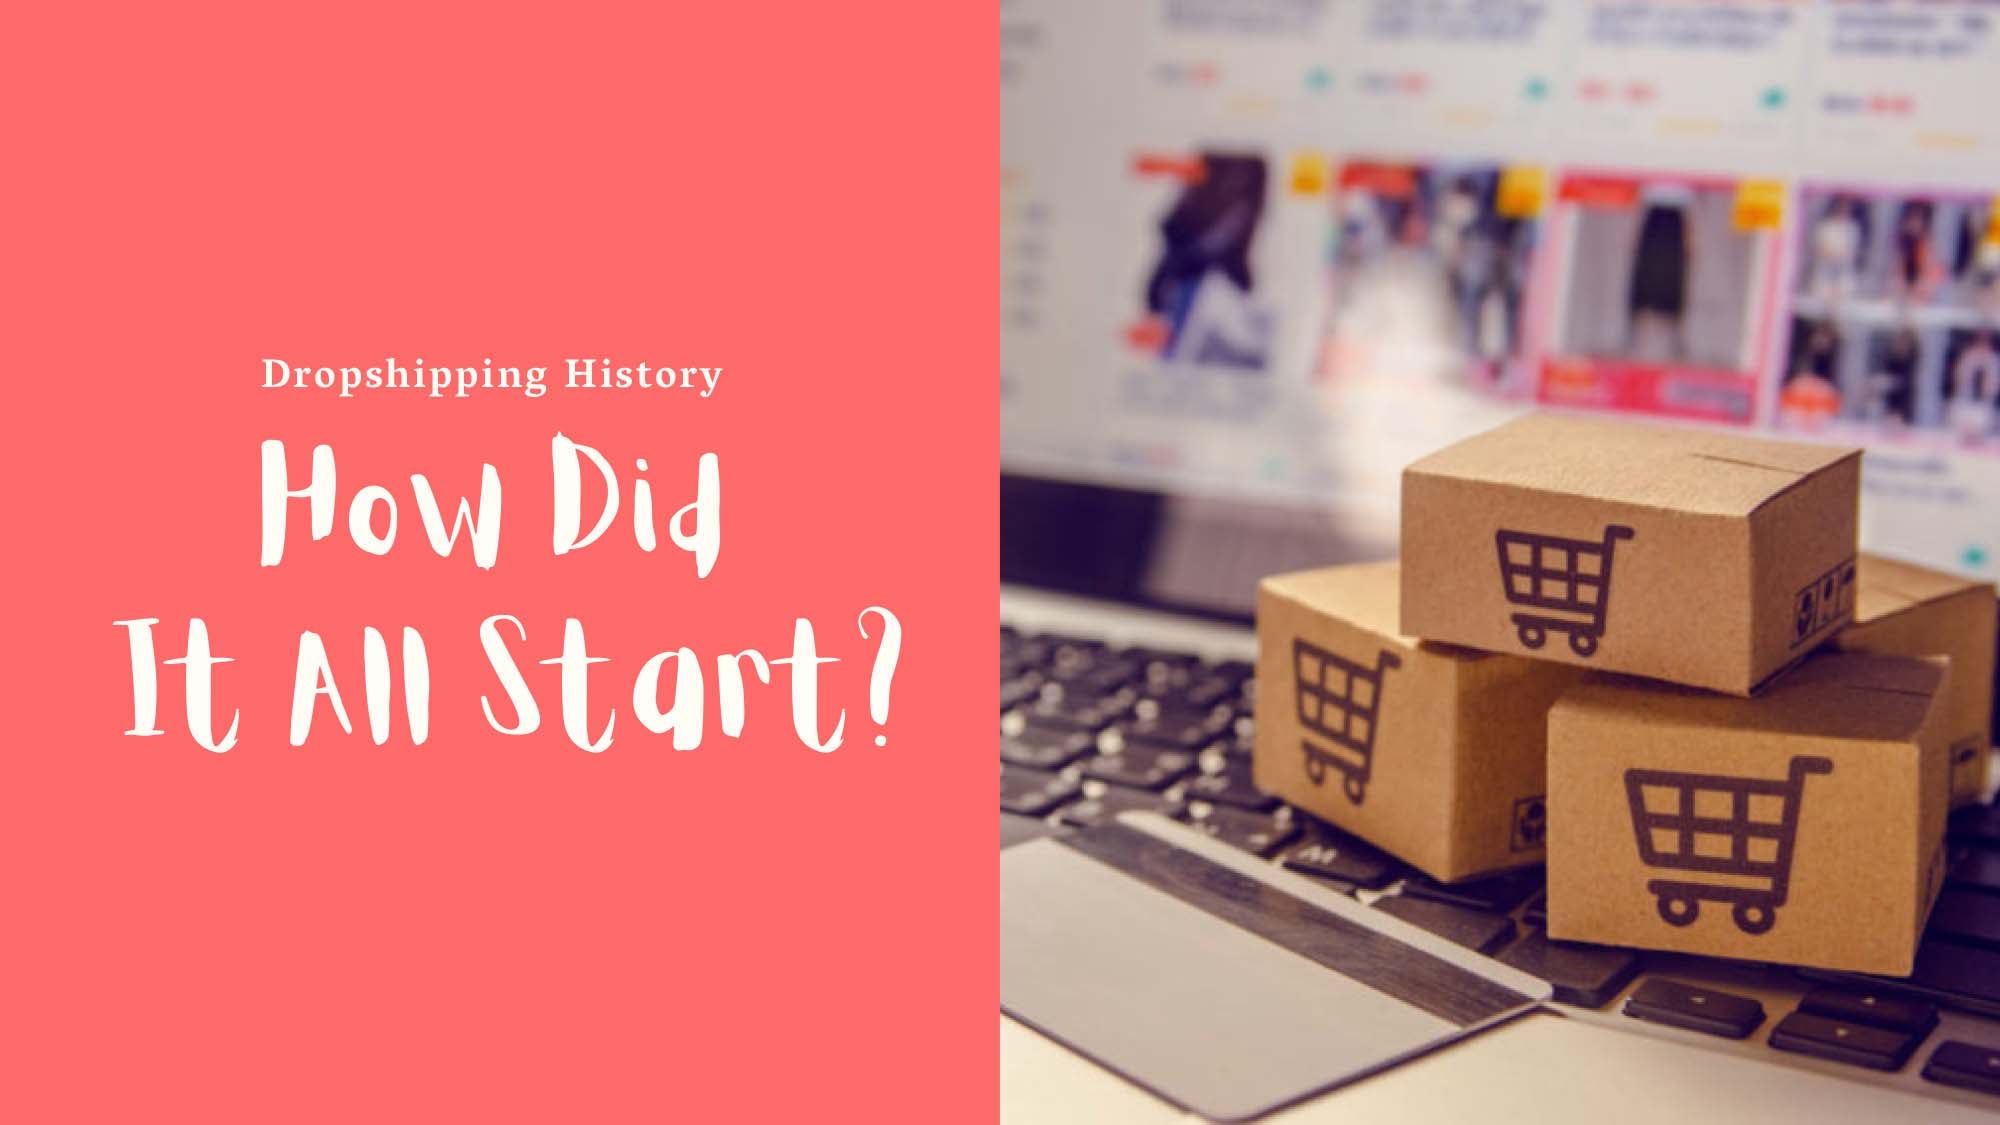 Dropshipping History: How Did It All Start?